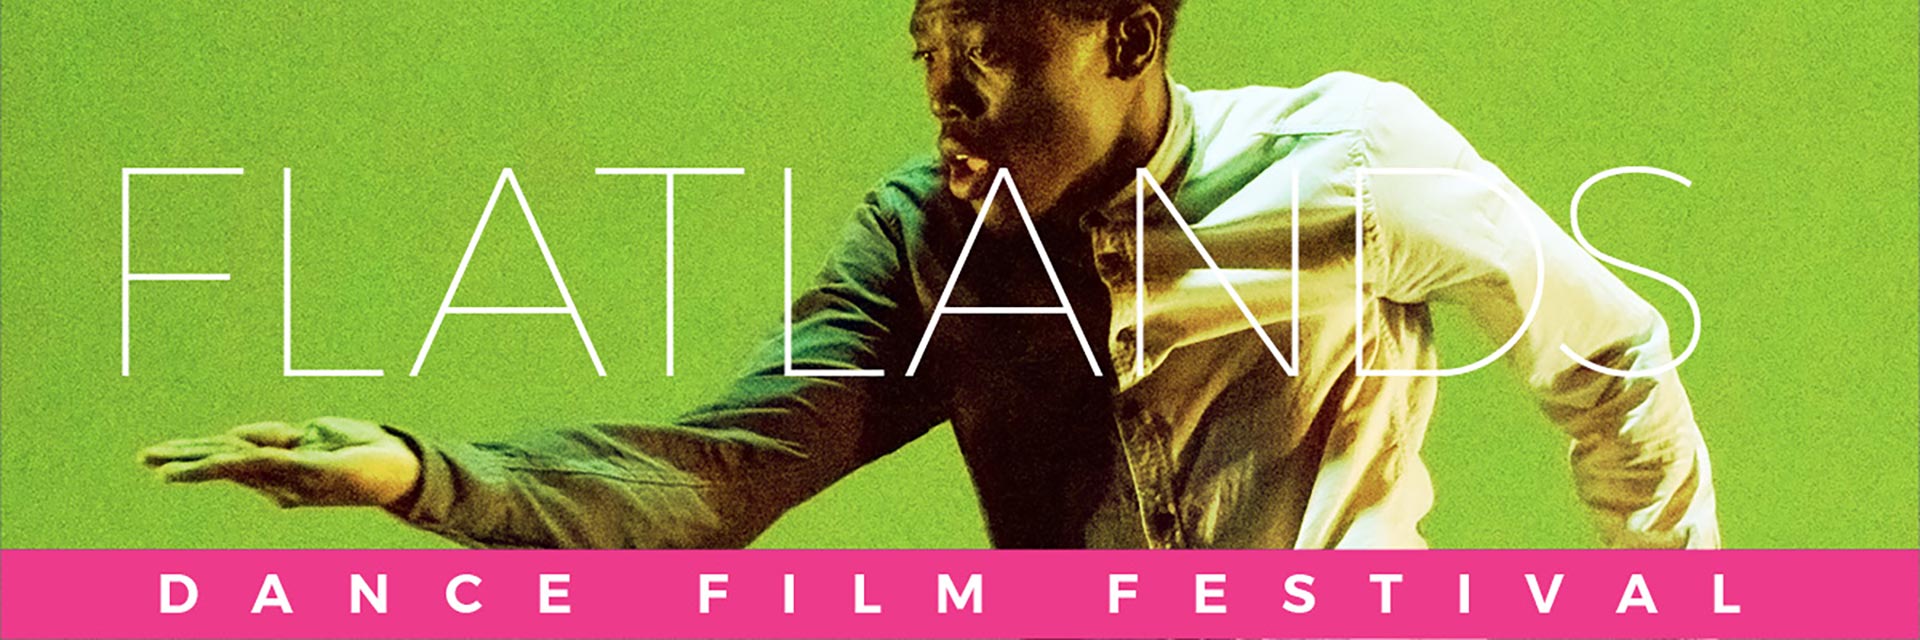 Flatlands dance film festival banner with man dancing with outstretched hand